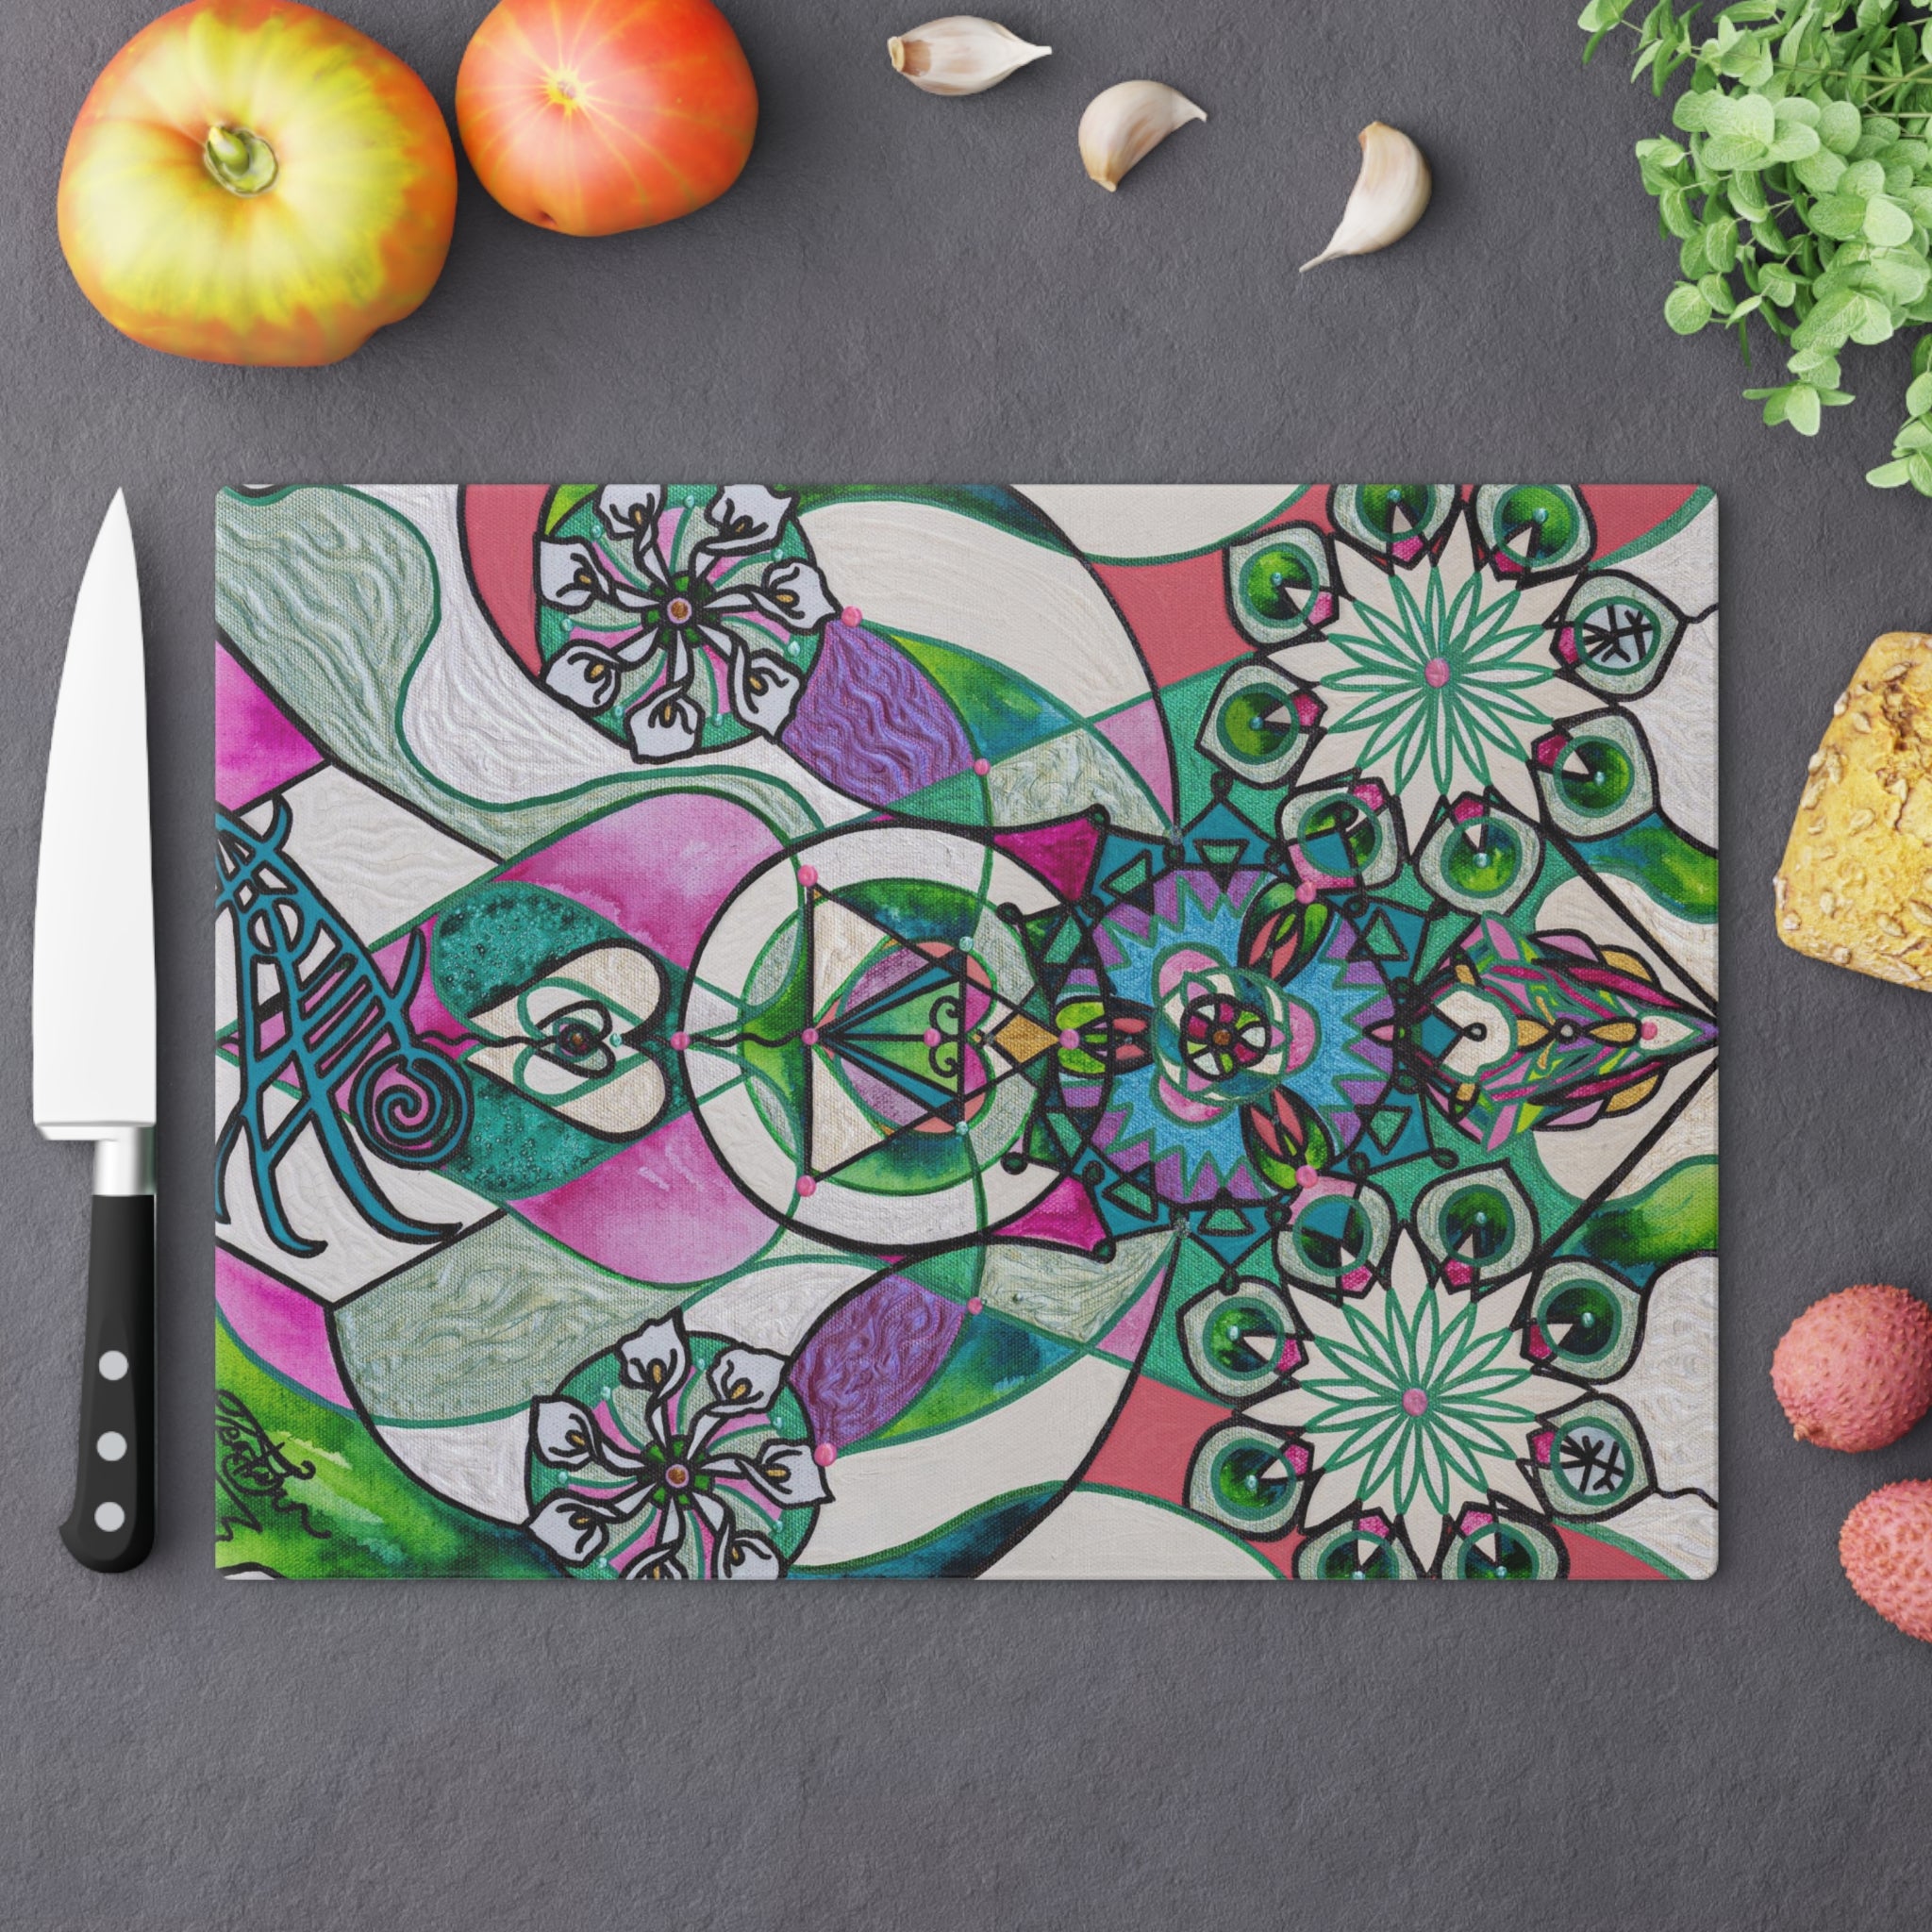 we-are-the-best-place-to-buy-quan-yin-consciousness-cutting-board-online-now_1.jpg